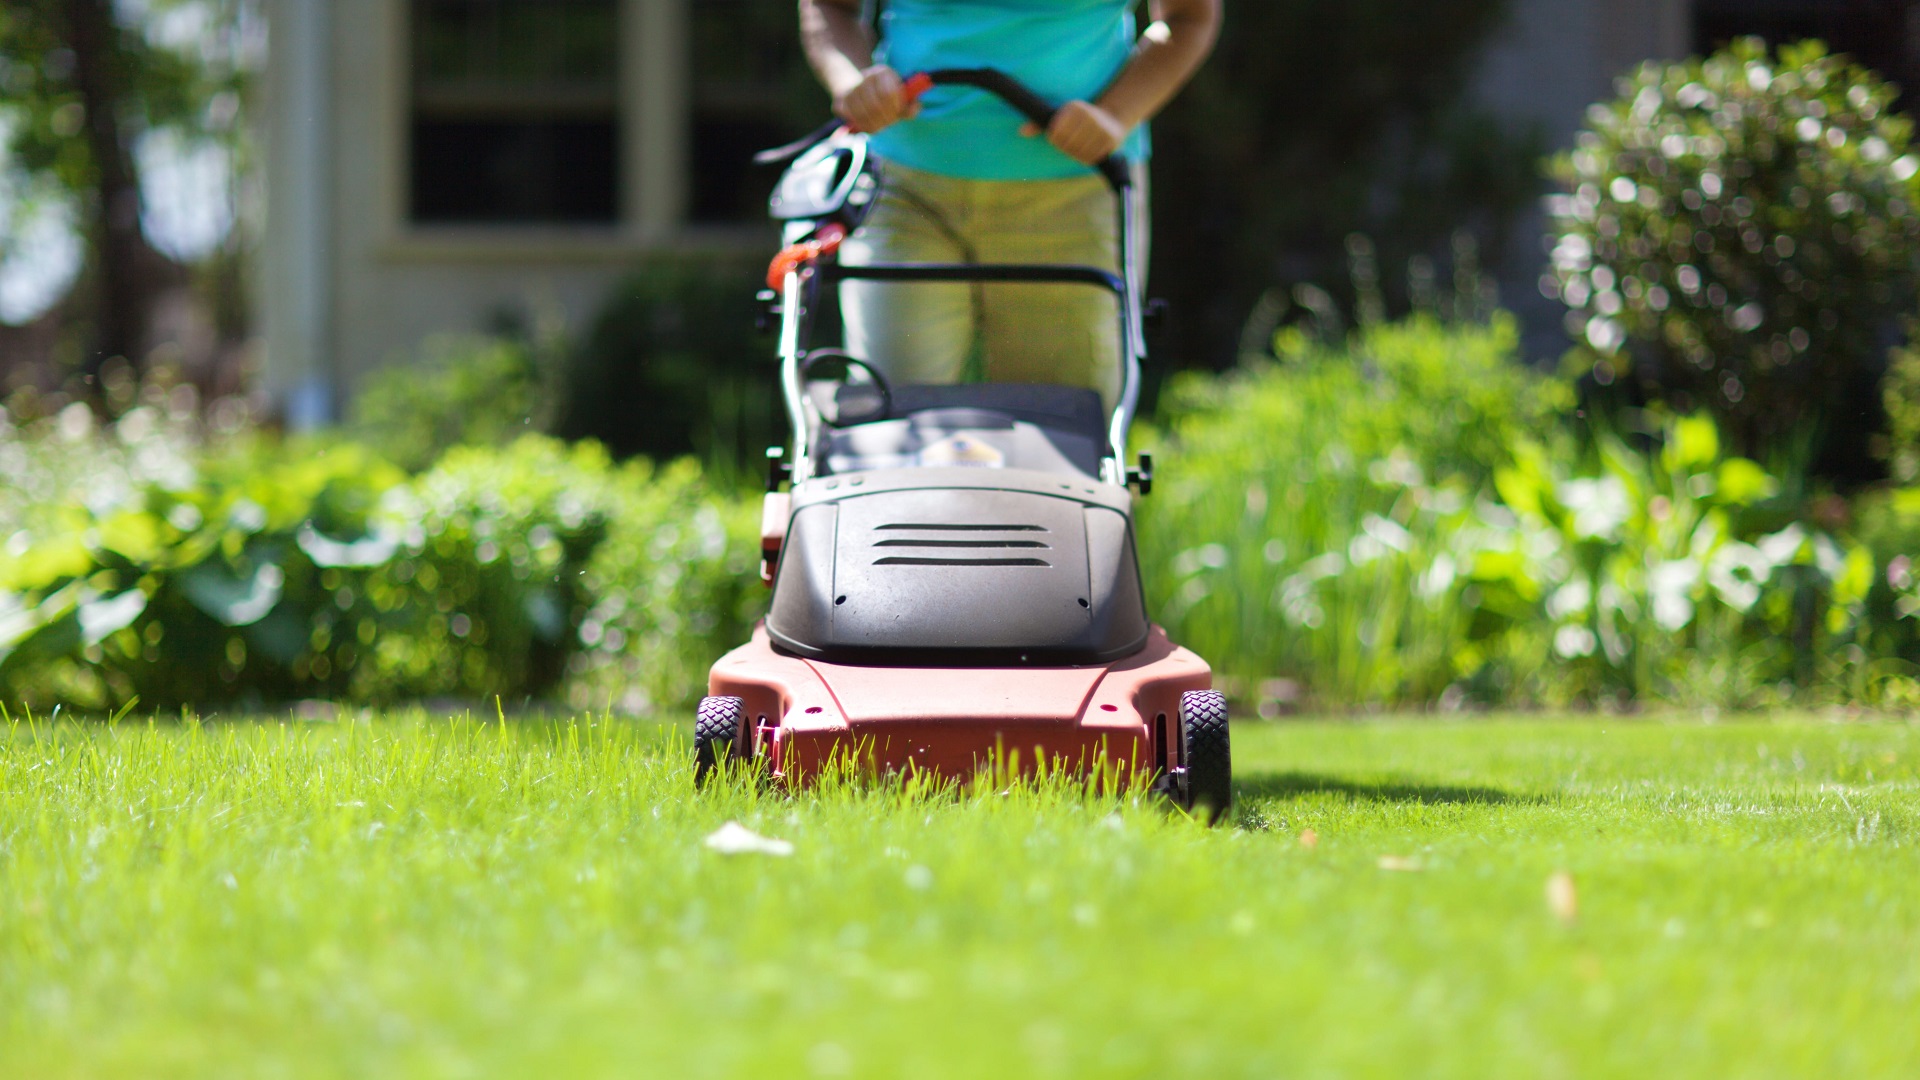 What Is The Best Time To Mow Lawn?